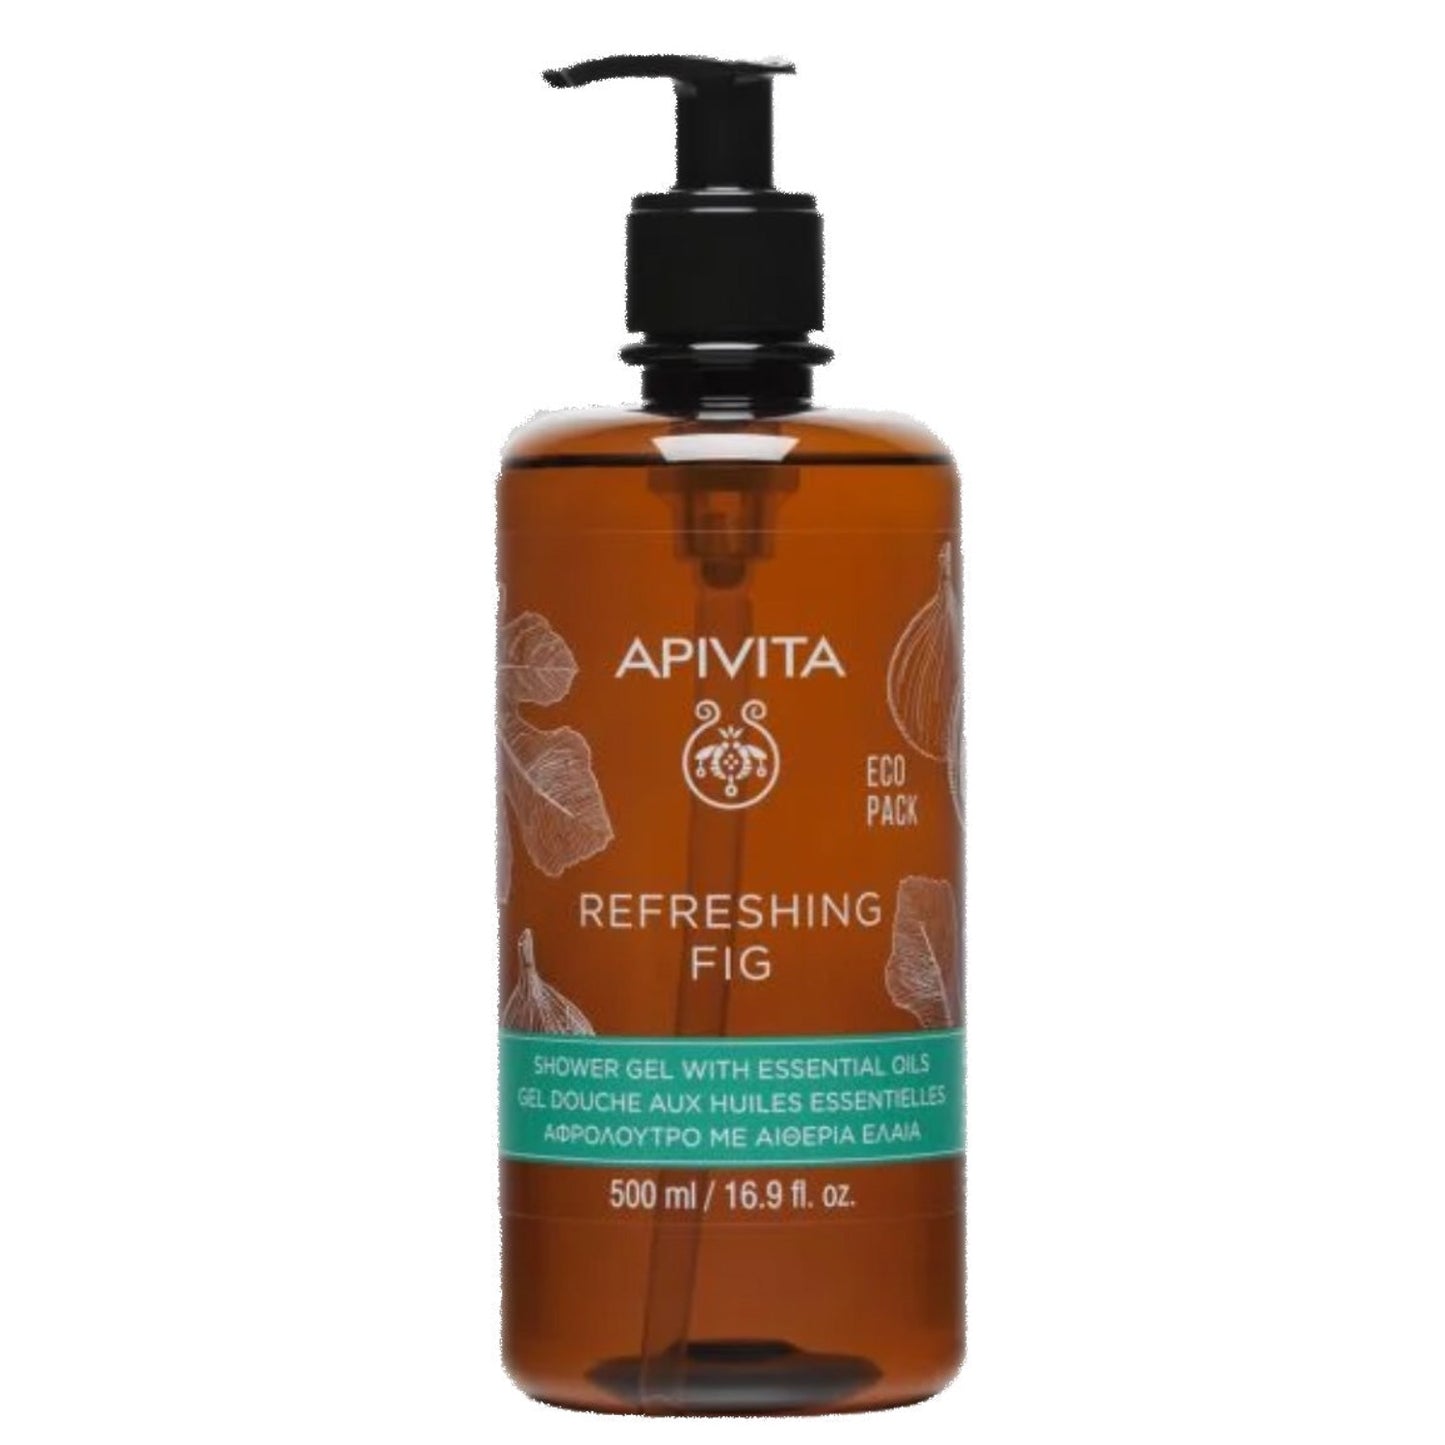 Apivita Refreshing Fig Shower Gel with Essential Oils with 88% natural origin ingridients features an advanced formula which contains refreshing fig and essential oils, ideal for aromatherapy.